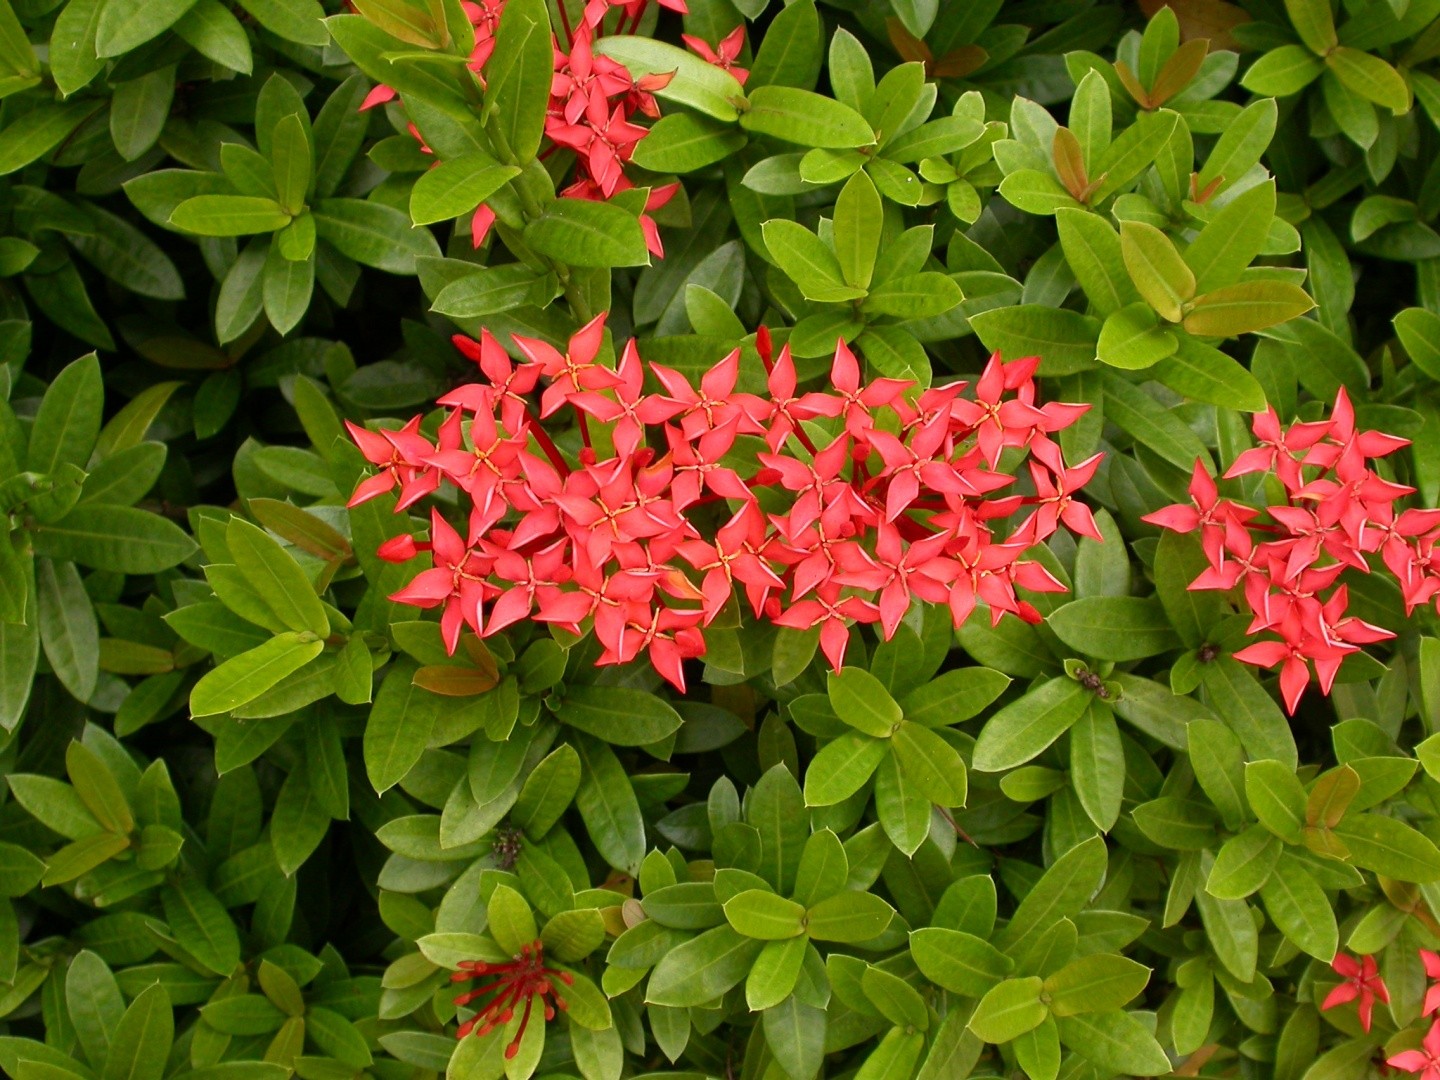 Chinese ixora (Ixora chinensis) Plant Care, Growing, Uses - PictureThis